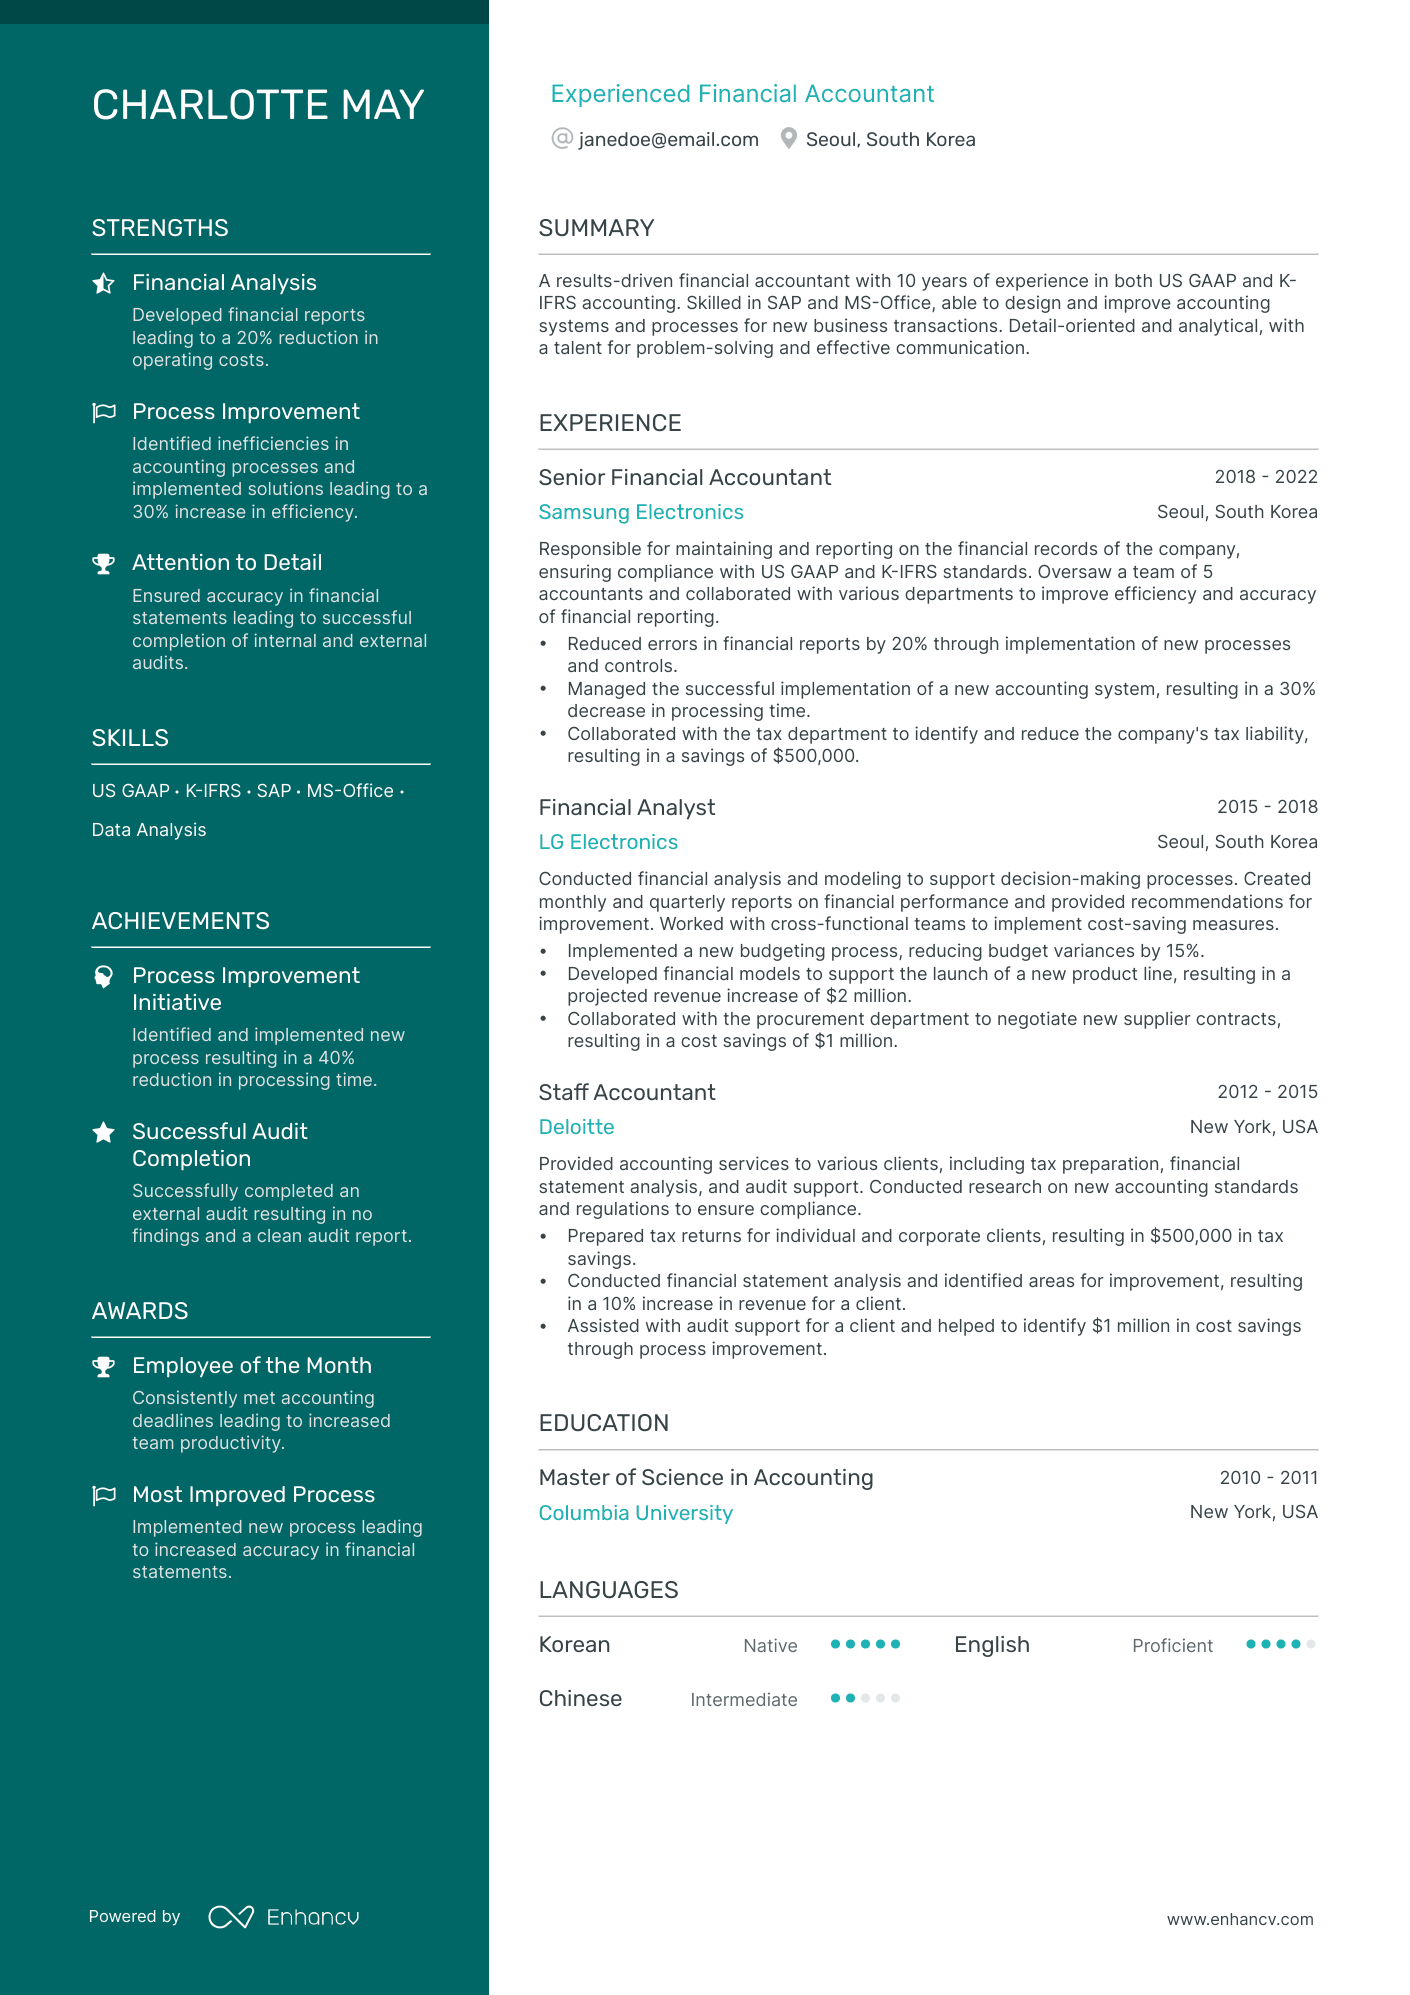 Accounting resume example